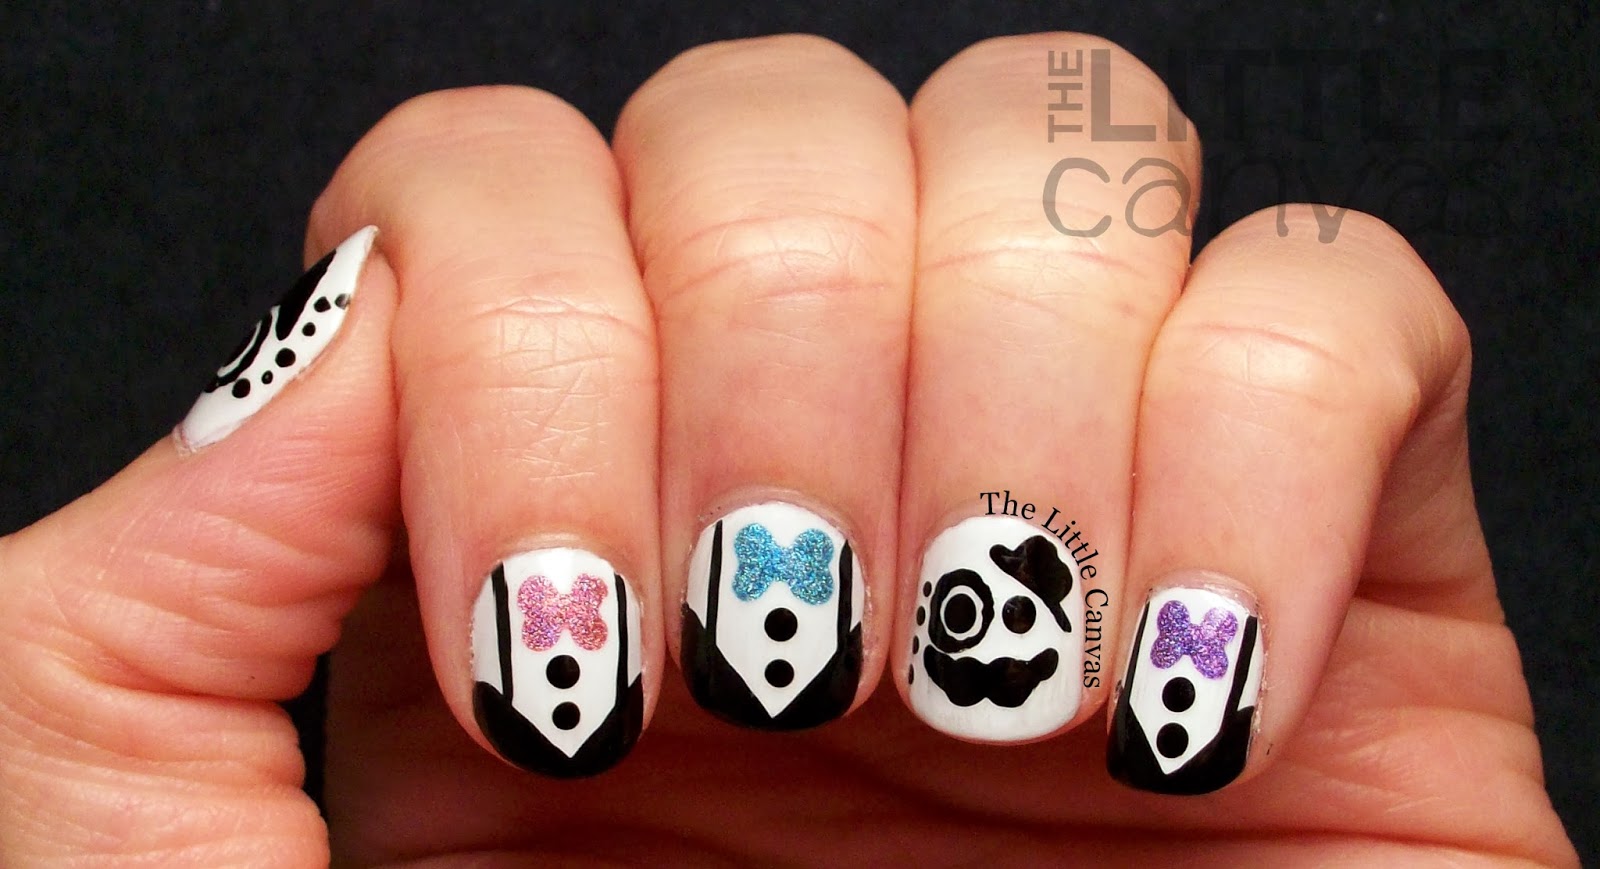 7. Tuxedo Nail Design with Bow - wide 2